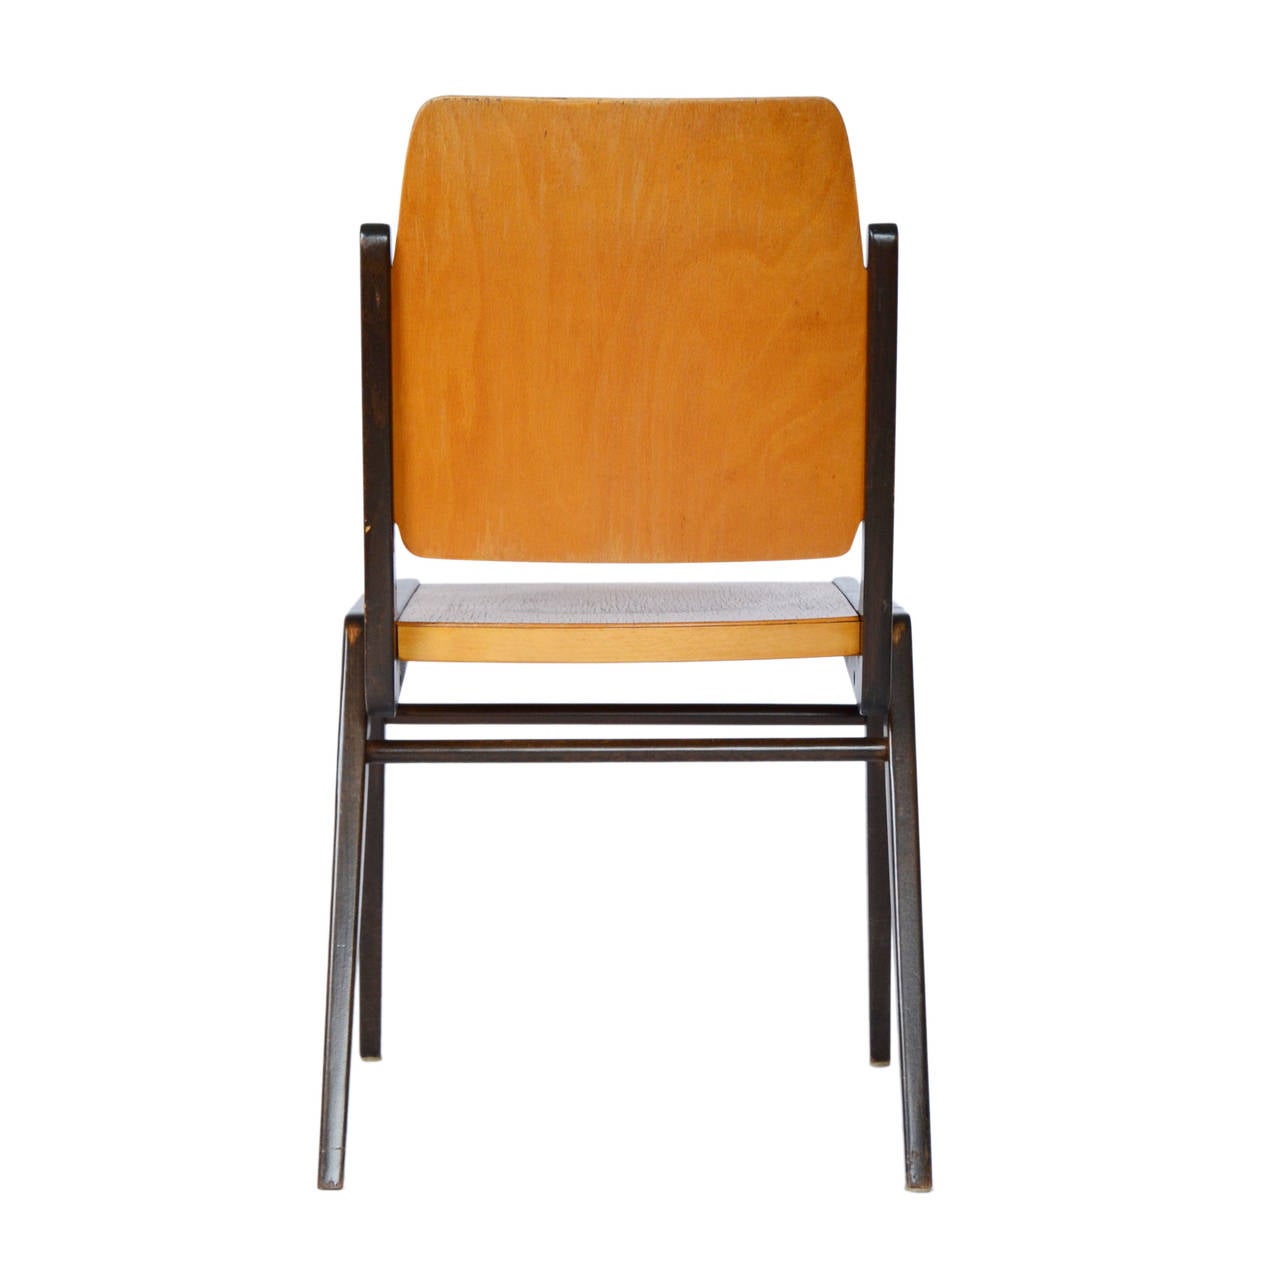 One of 12 Stacking Chairs Franz Schuster, Bicolored Beech, Austria, 1959 For Sale 1